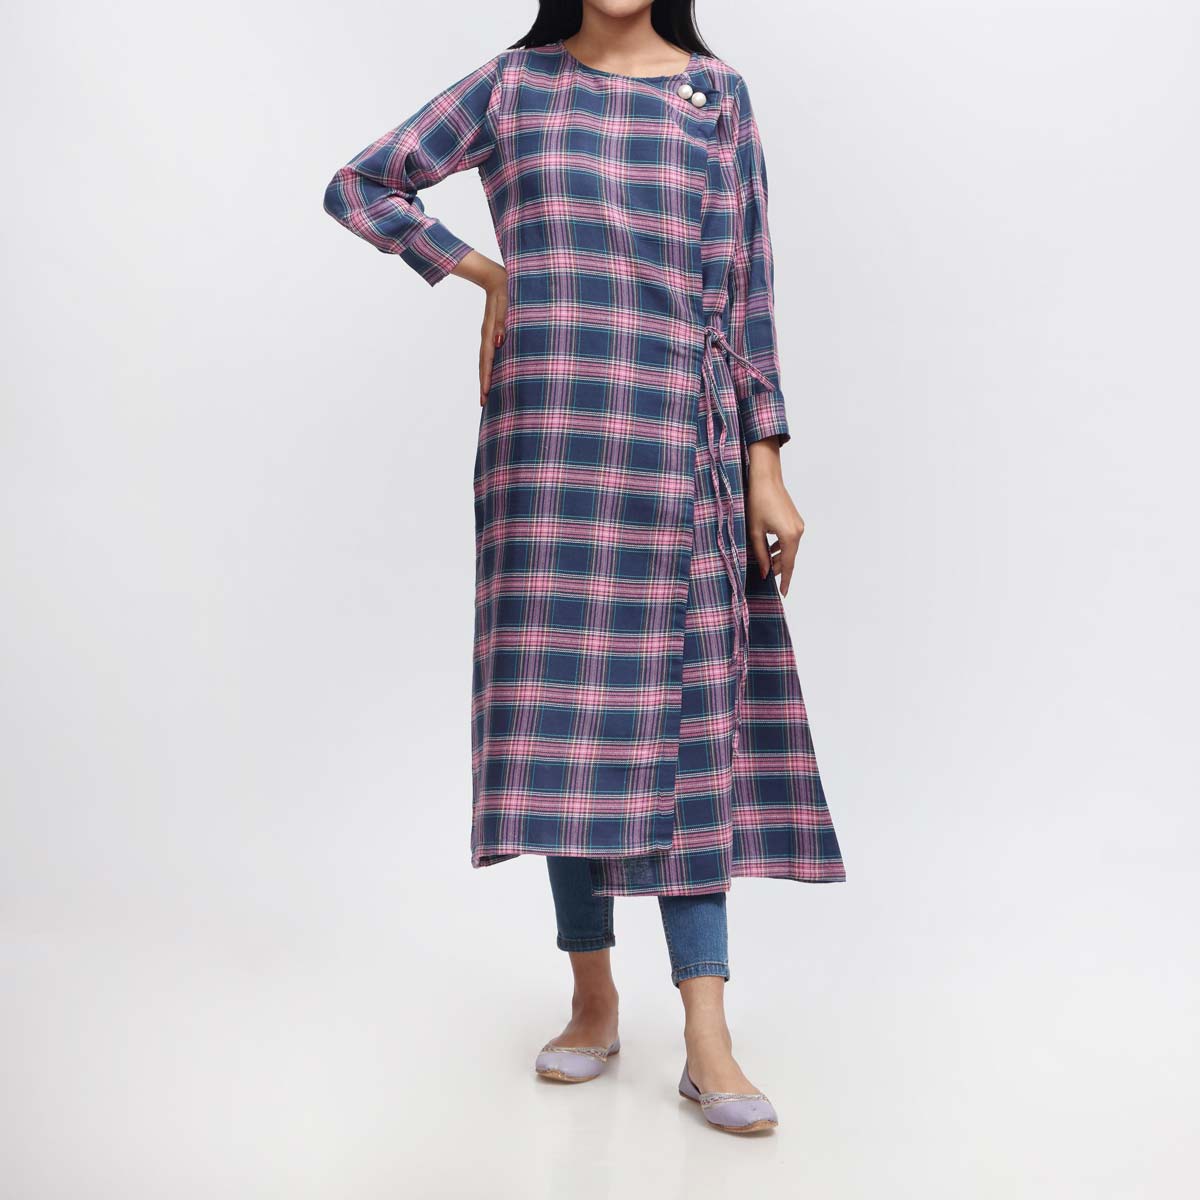 1PC- Flannel Checkered Shirt PW3293